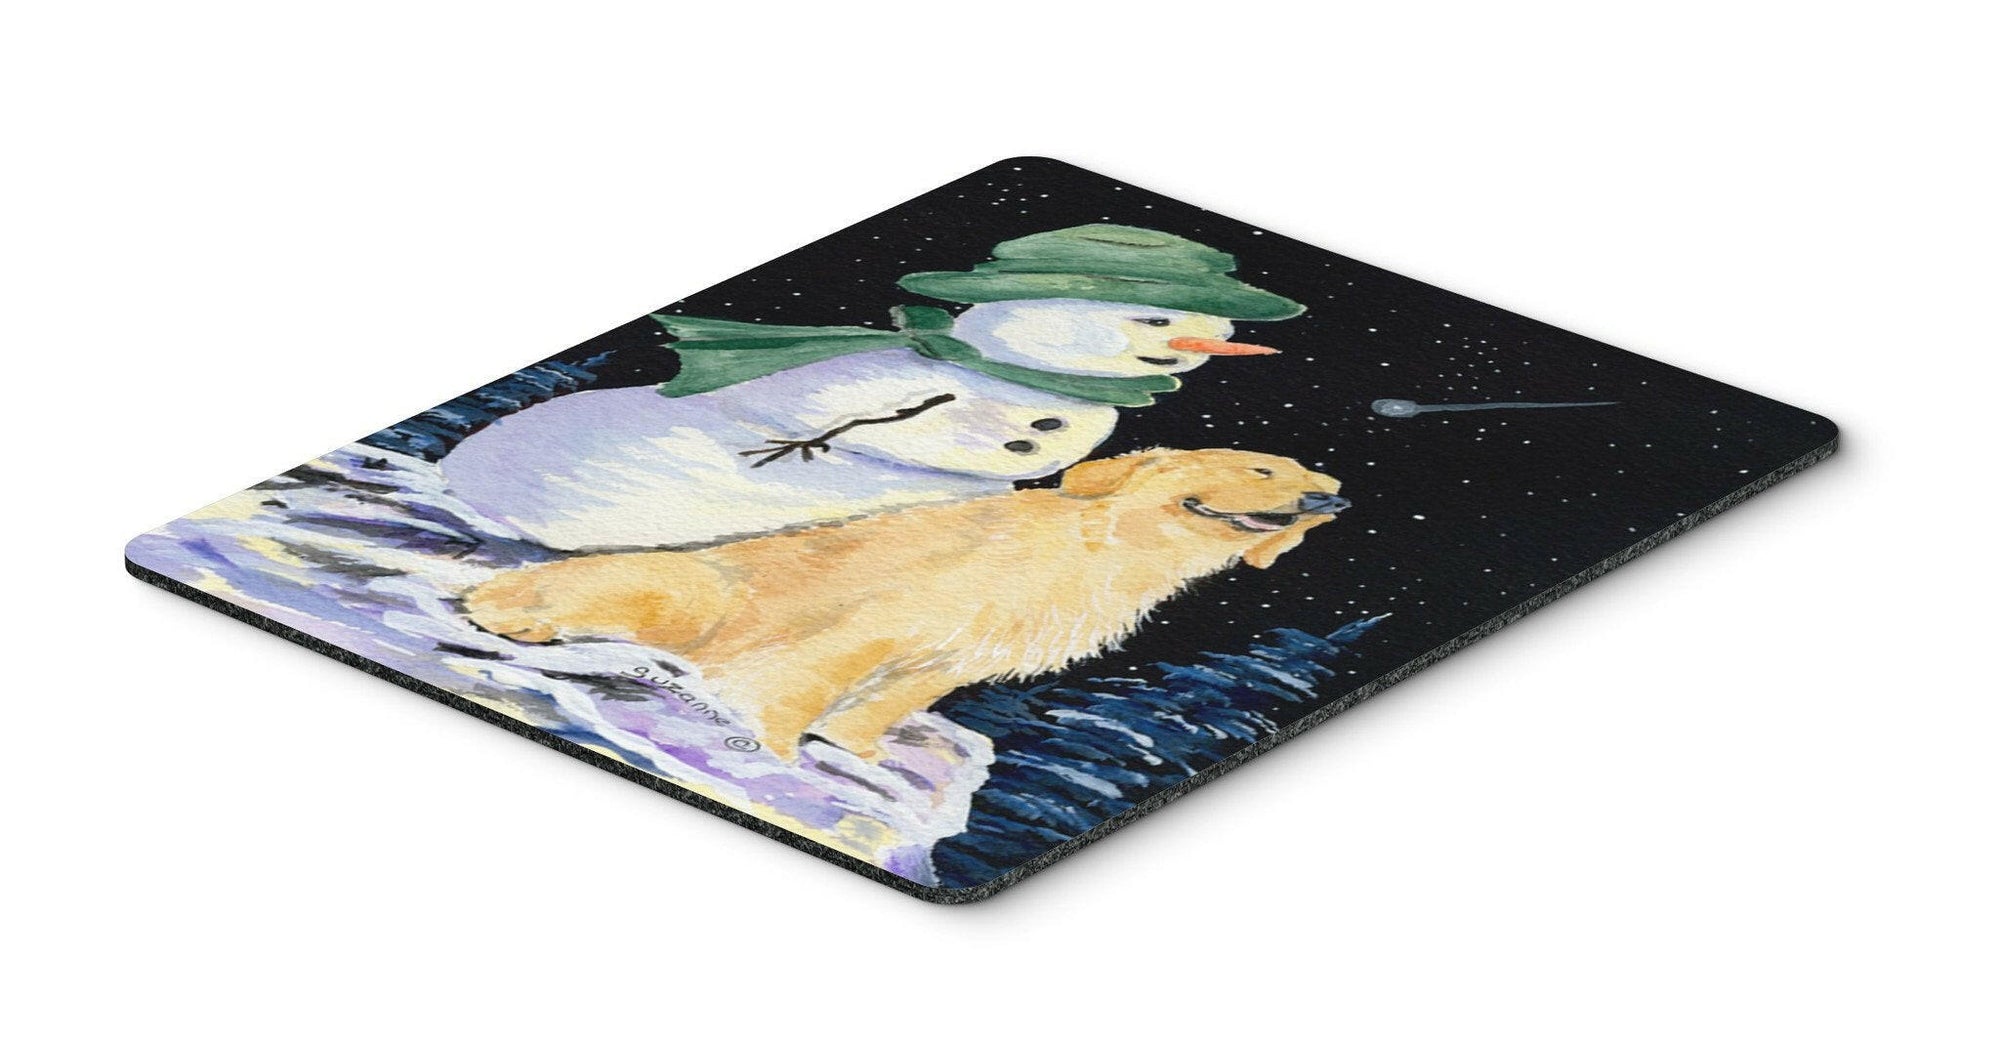 Golden Retriever with Snowman in Green Hat Mouse Pad / Hot Pad / Trivet by Caroline's Treasures